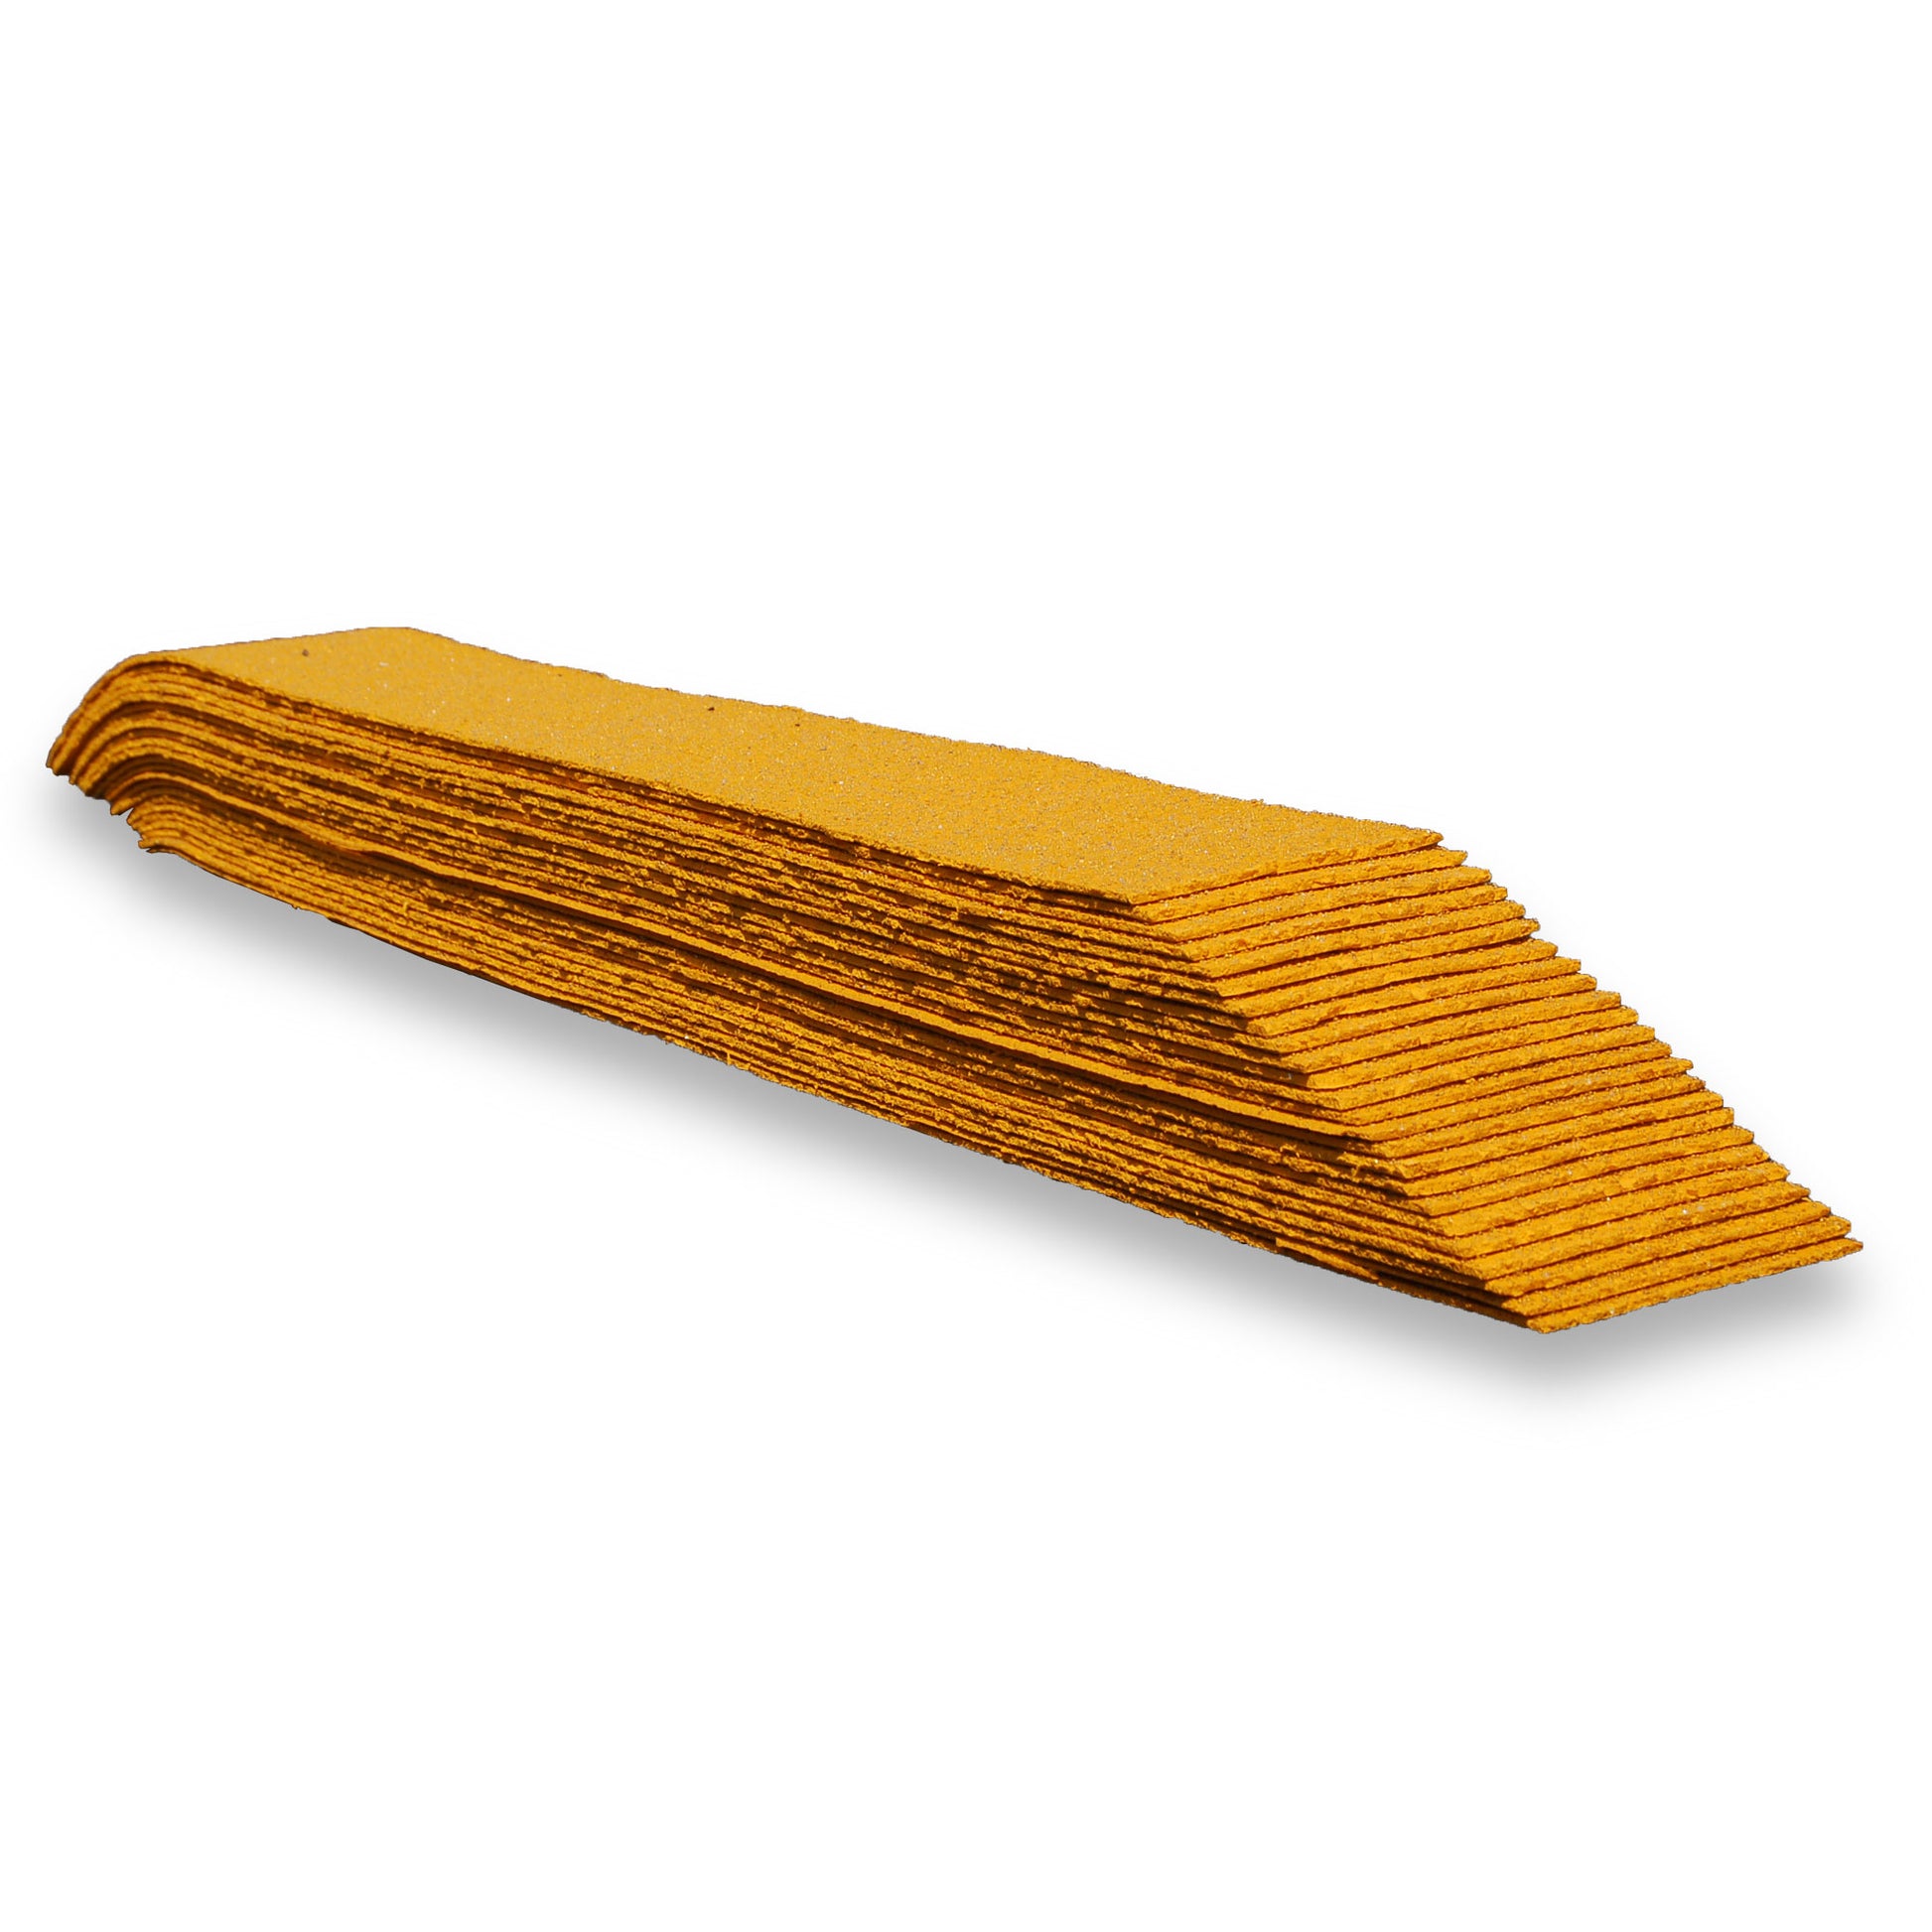 A stack of yellow thermoplastic lines